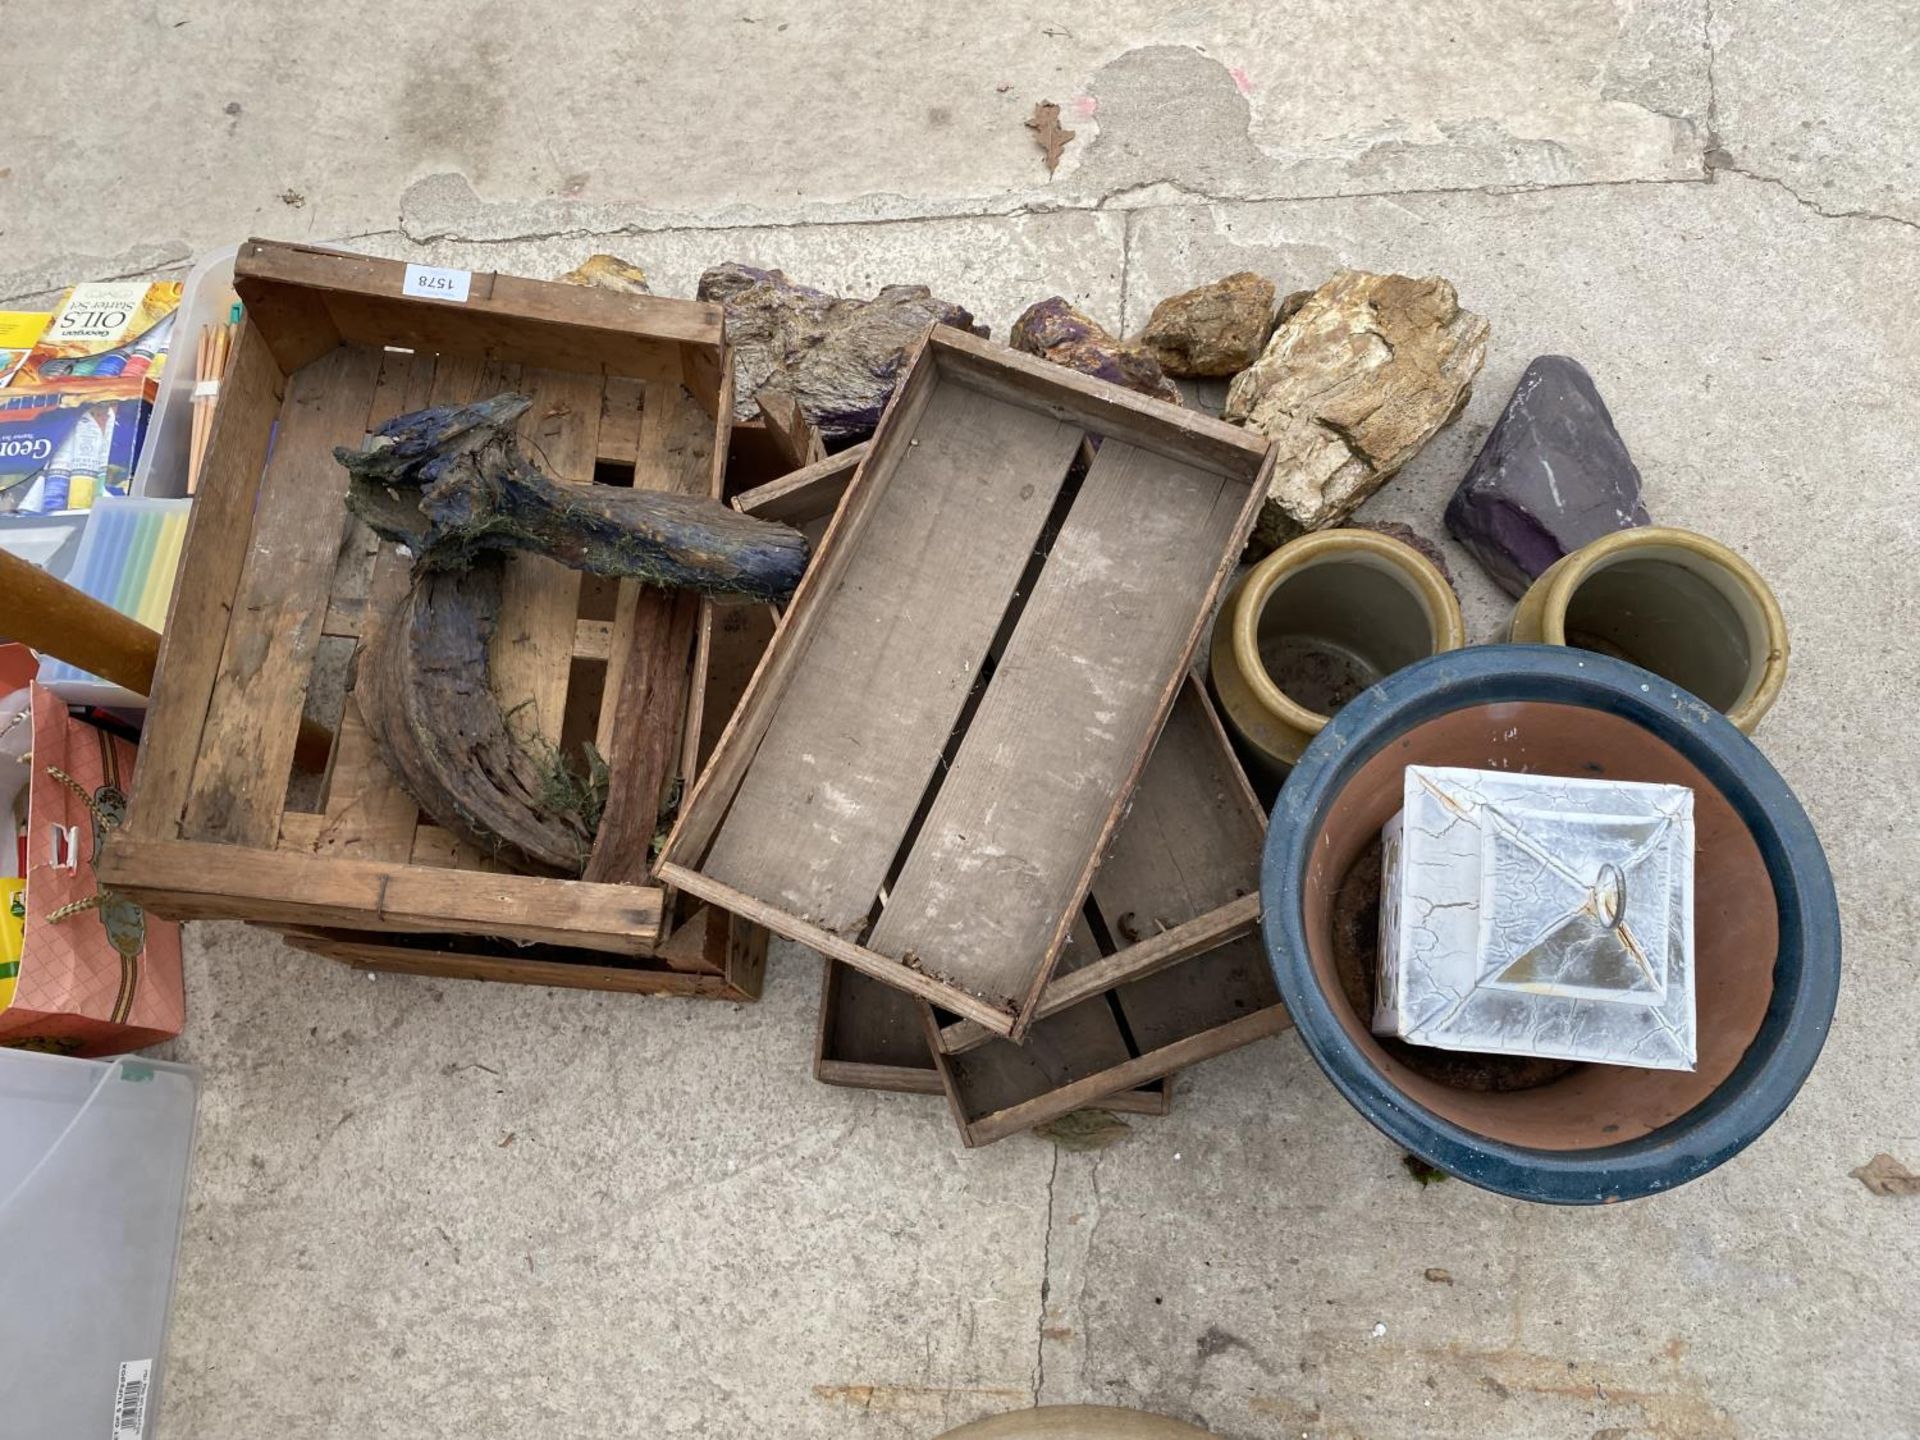 AN ASSORTMENT OF DECORATIVE ROCKS AND WOODEN CRATES ETC